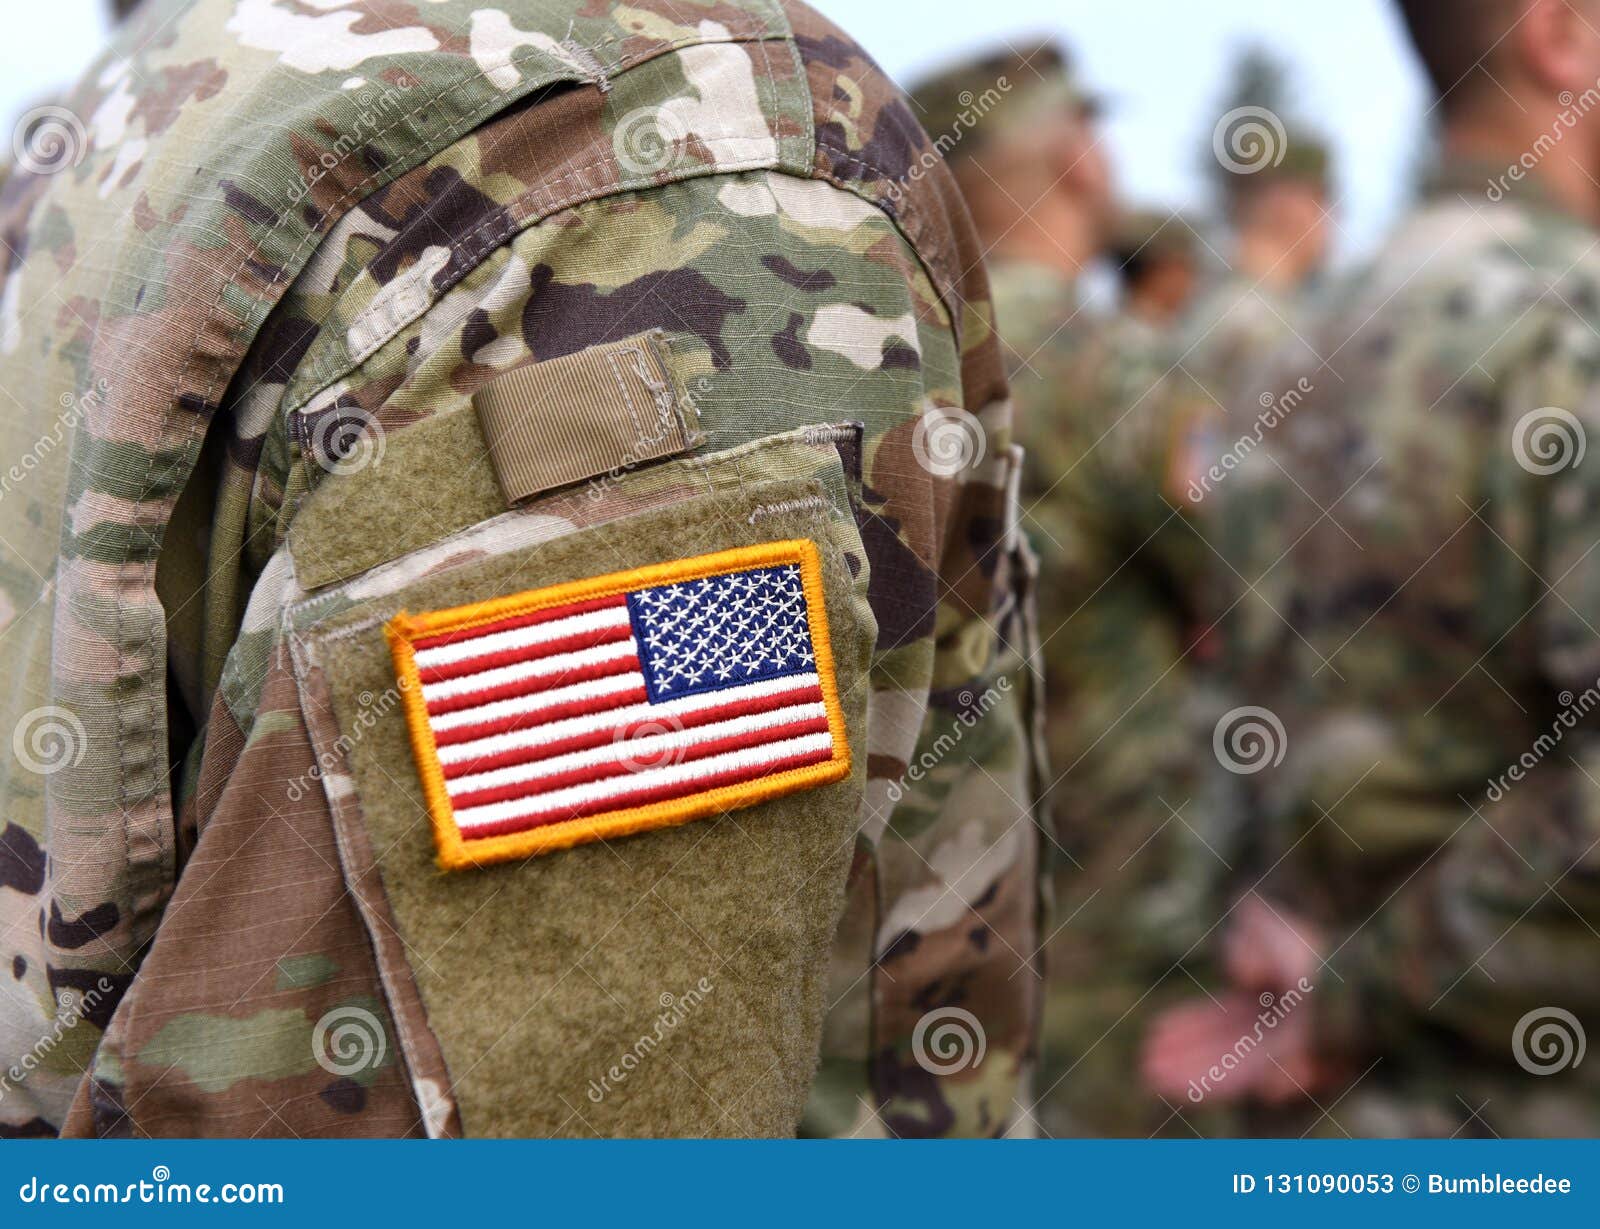 veterans day. us soldiers arm. us army. us troops.